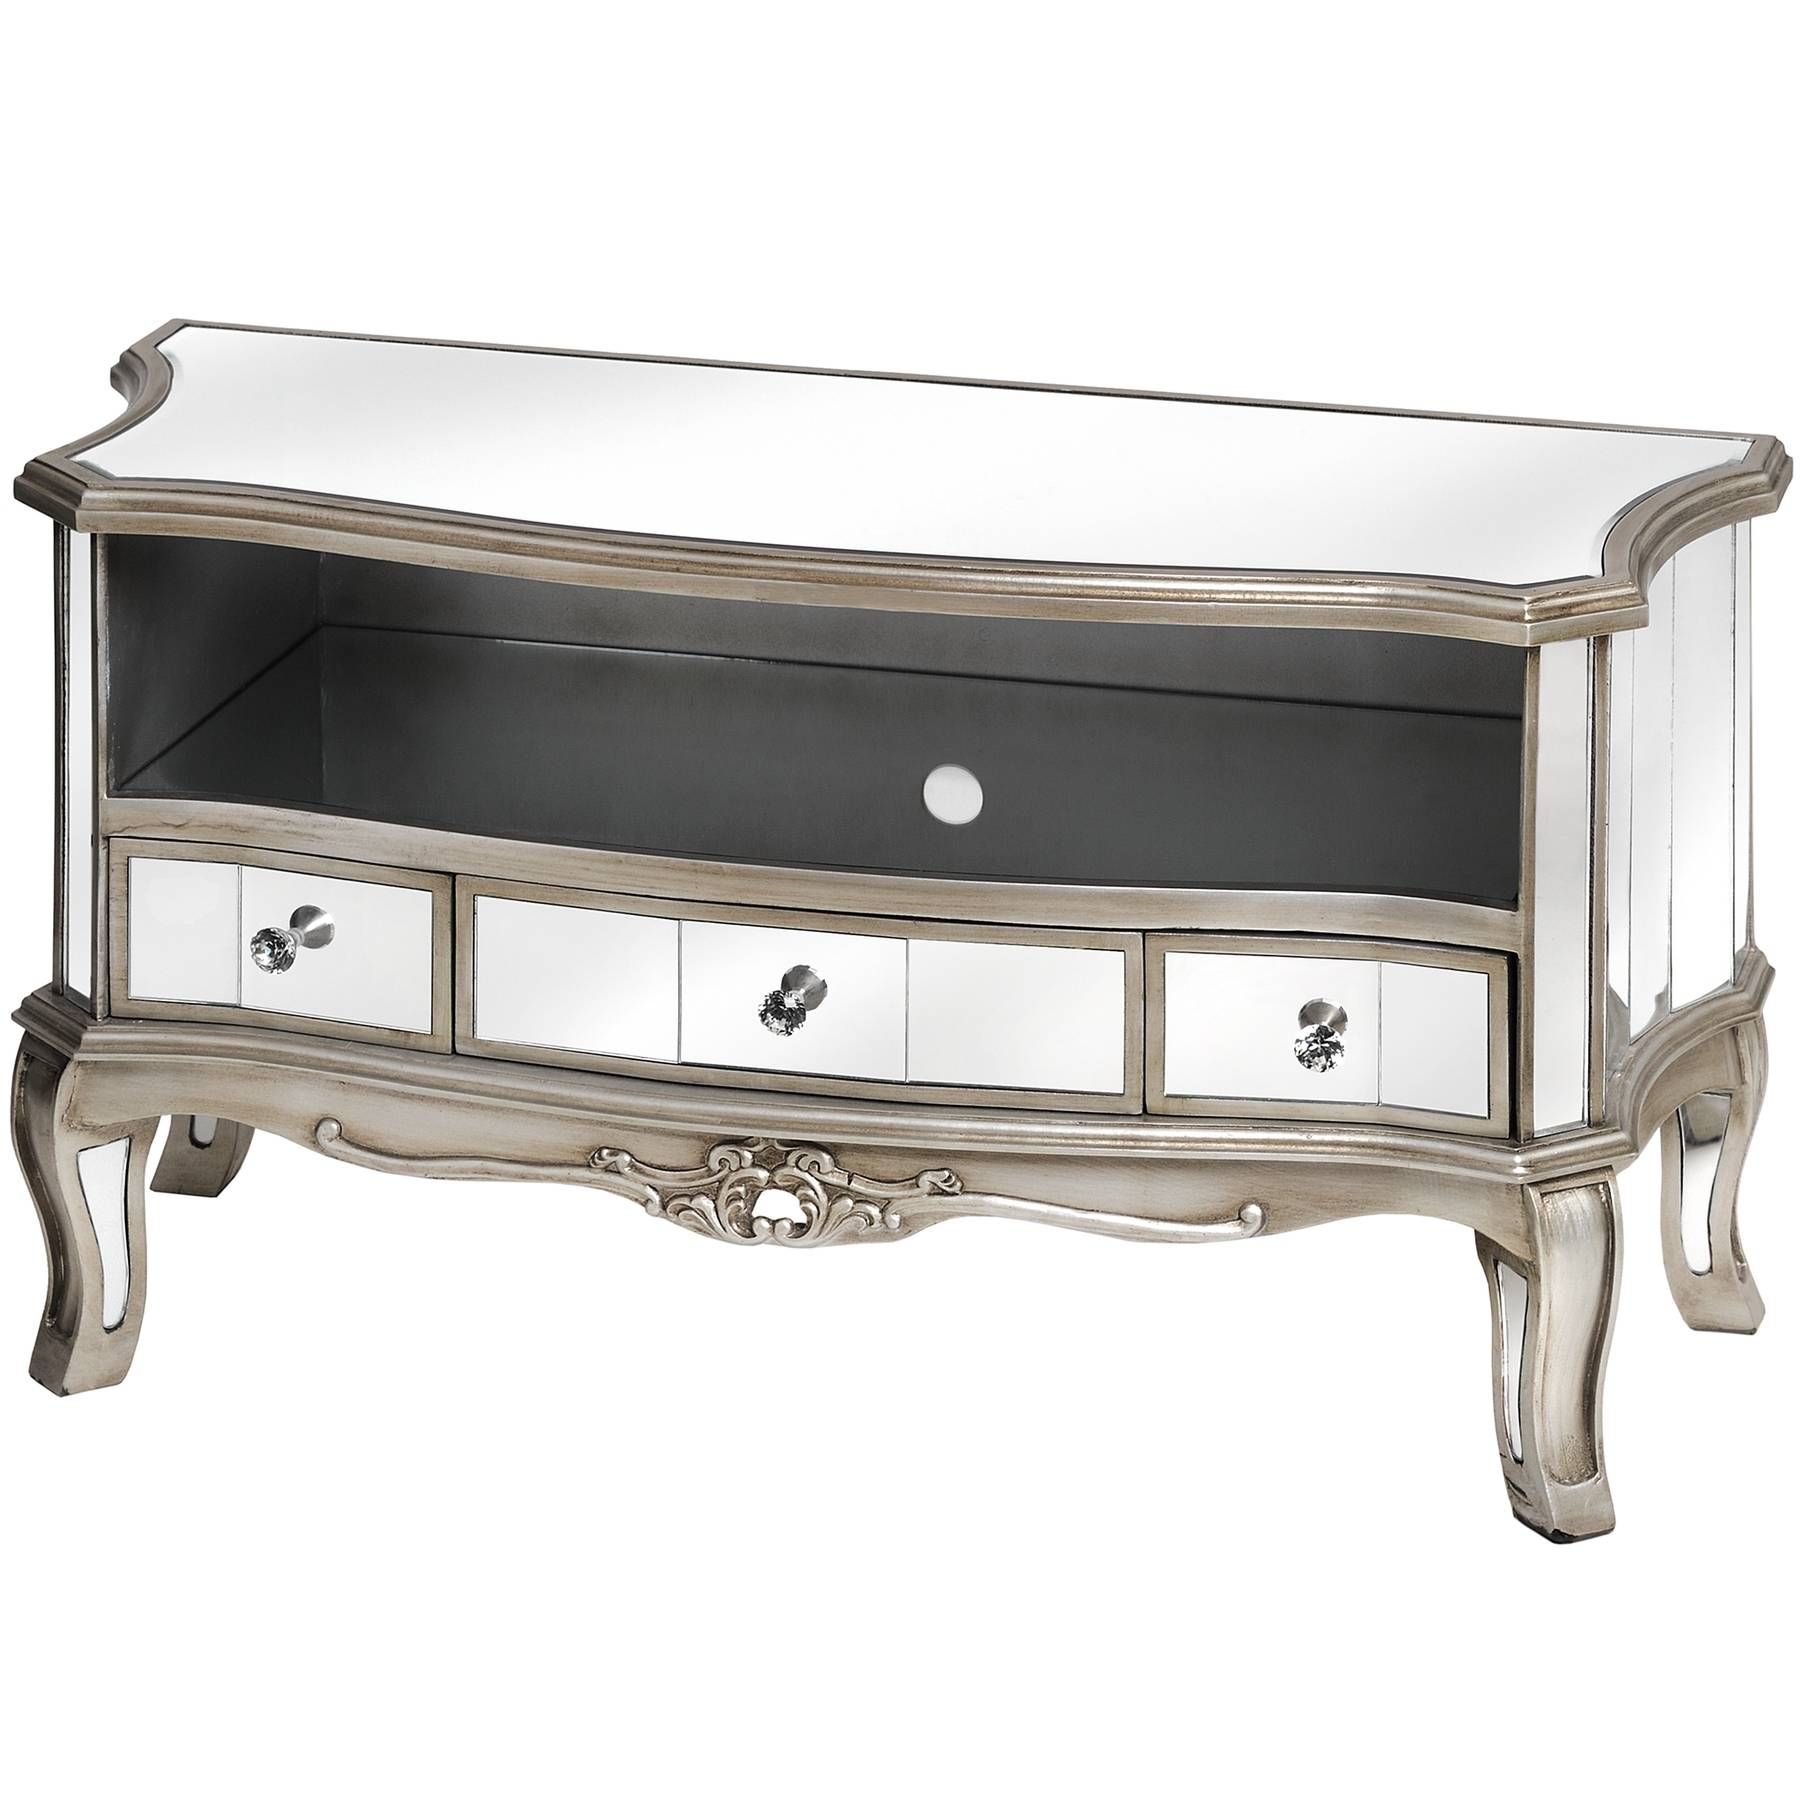 Argente Mirrored Television Cabinet | From Baytree Interiors Throughout Mirrored Tv Cabinets (View 6 of 15)